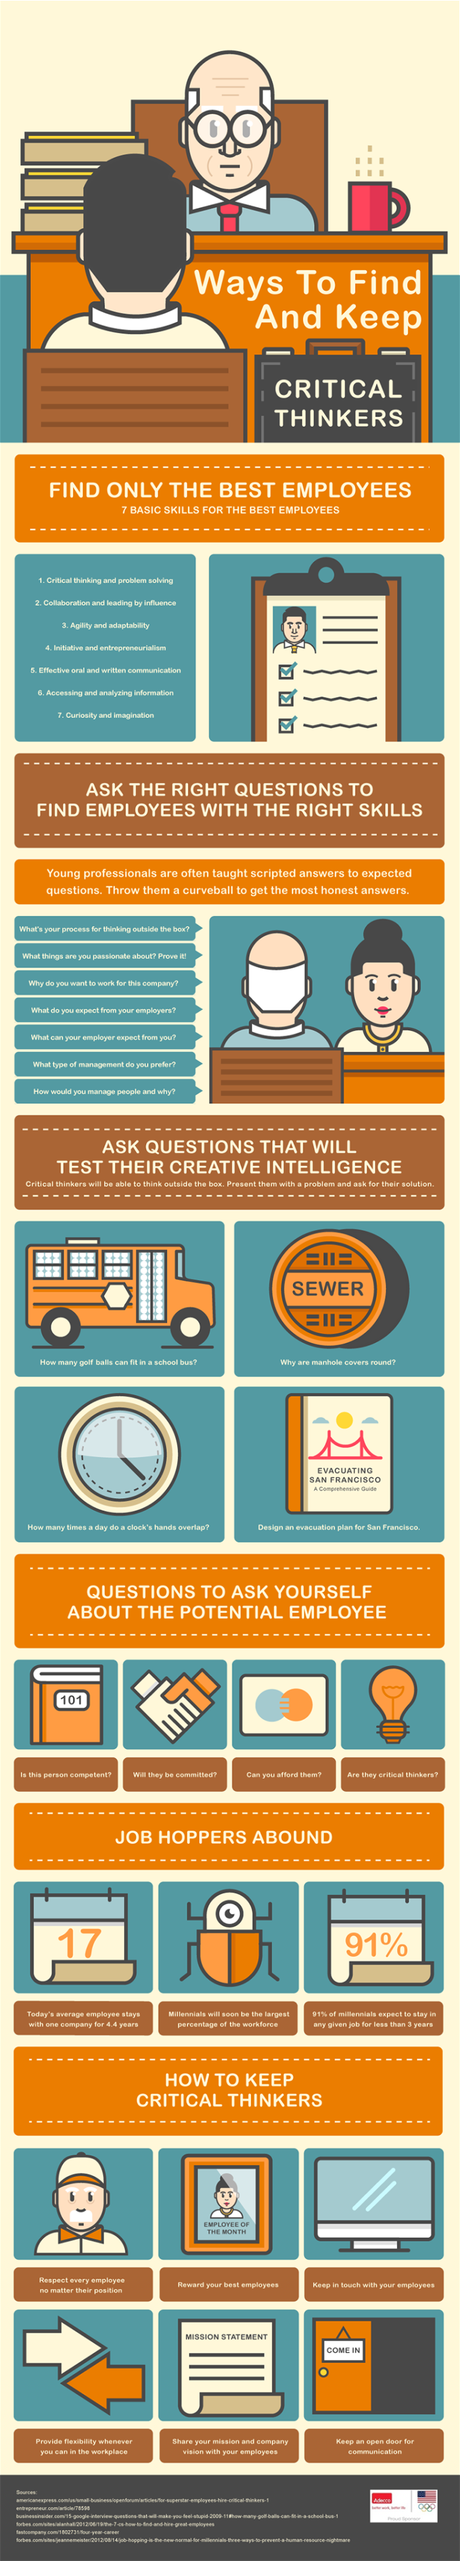 infographic-find-and-keep-critical-thinkers